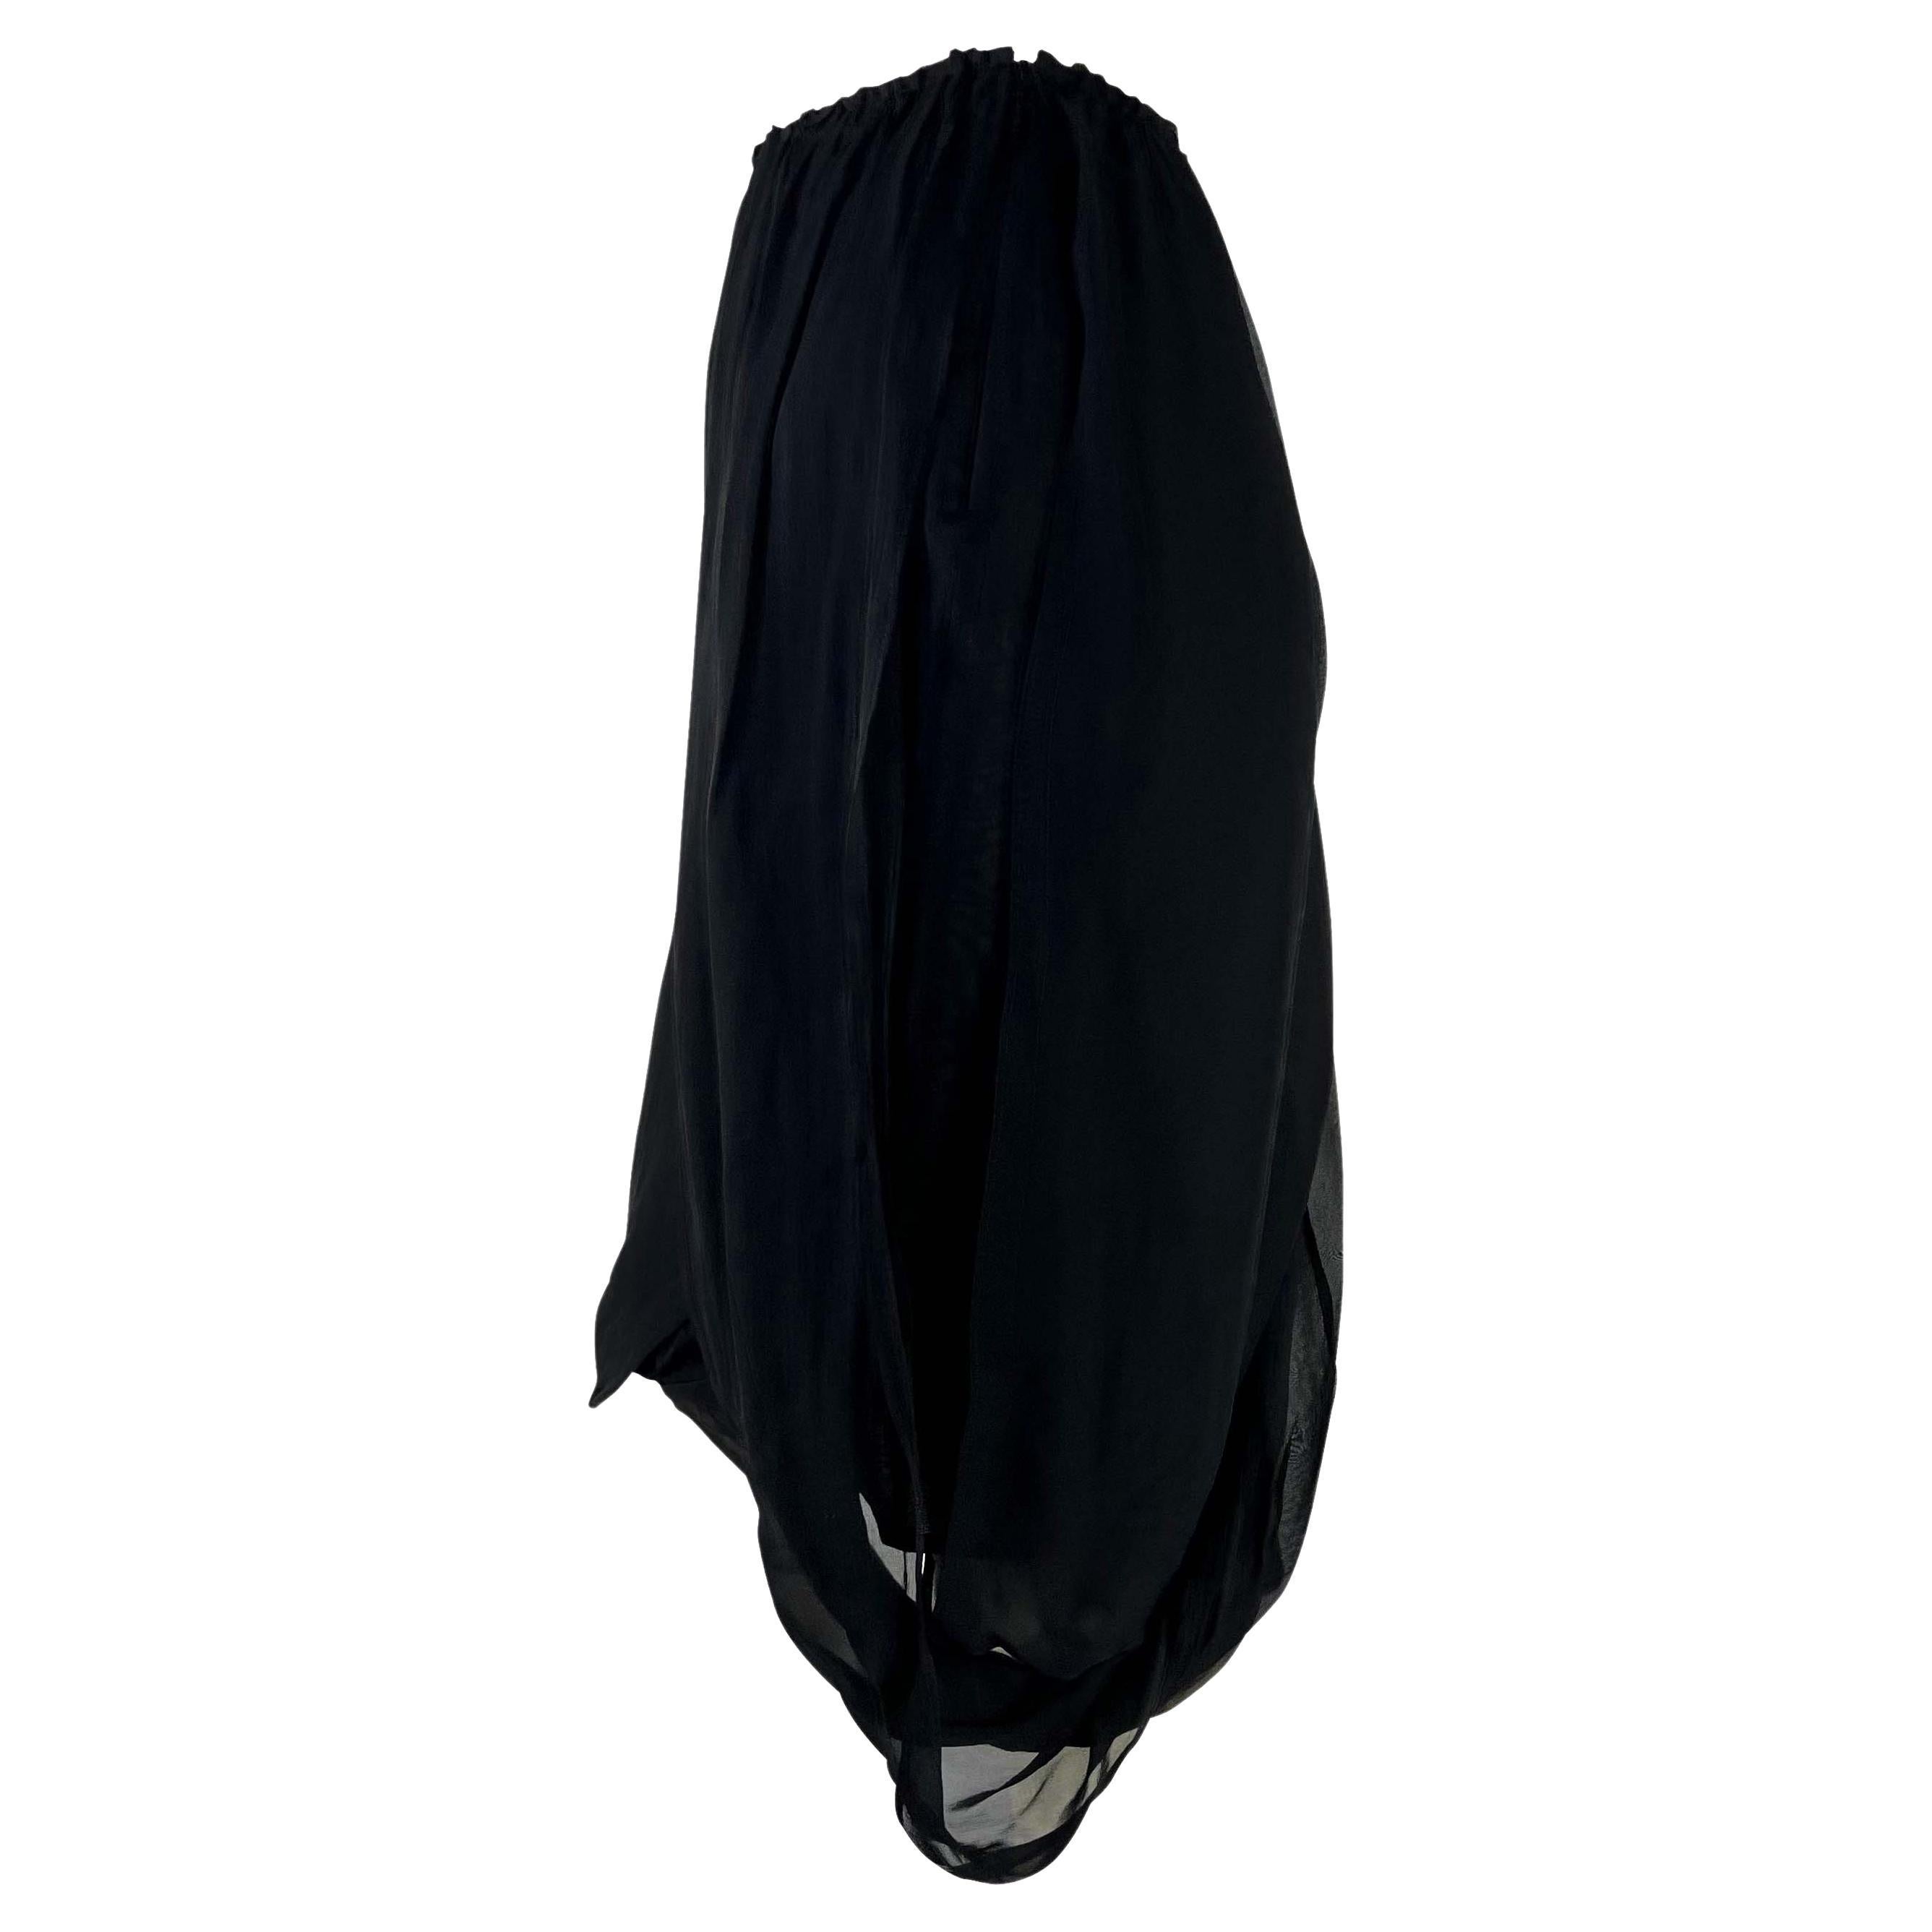 2002 Gucci by Tom Ford Black Silk Chiffon Sheer Skirt In Excellent Condition For Sale In West Hollywood, CA